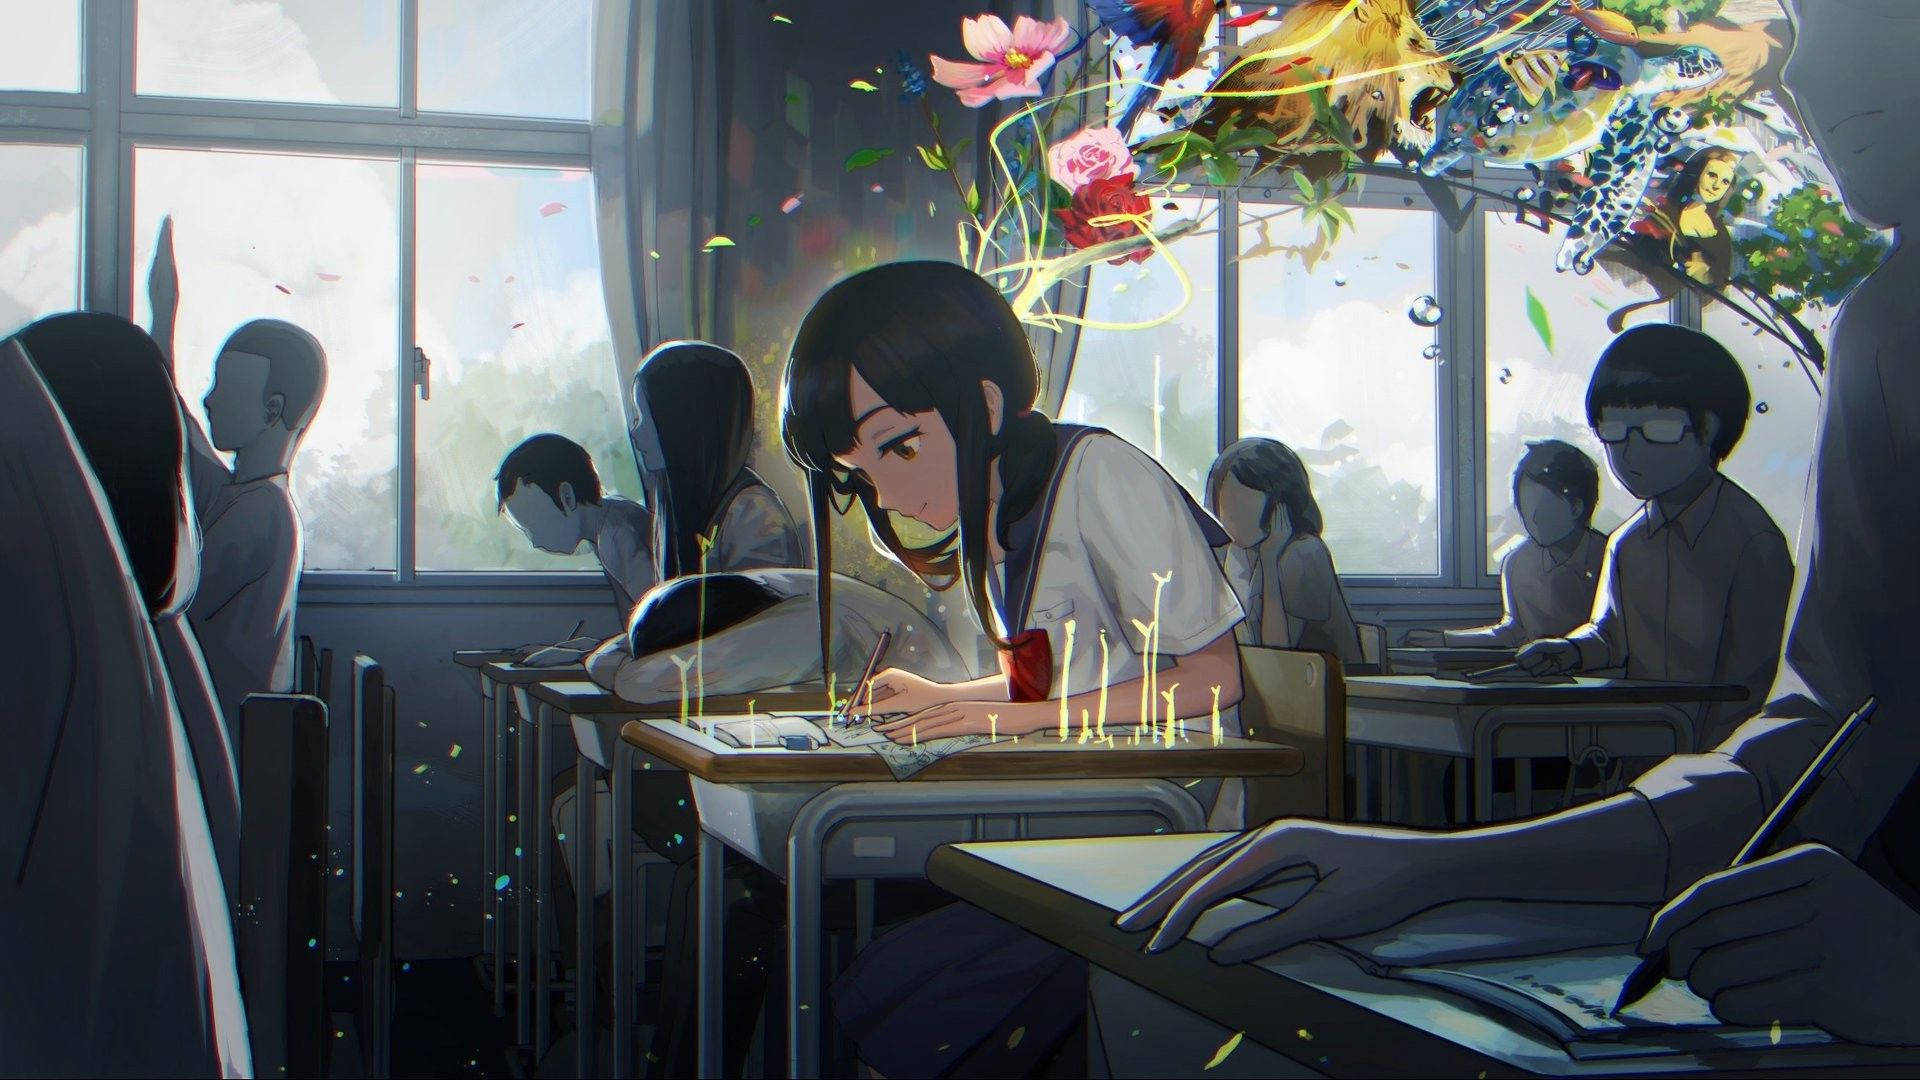 Colorful Anime Girl In Anime Classroom Wallpaper